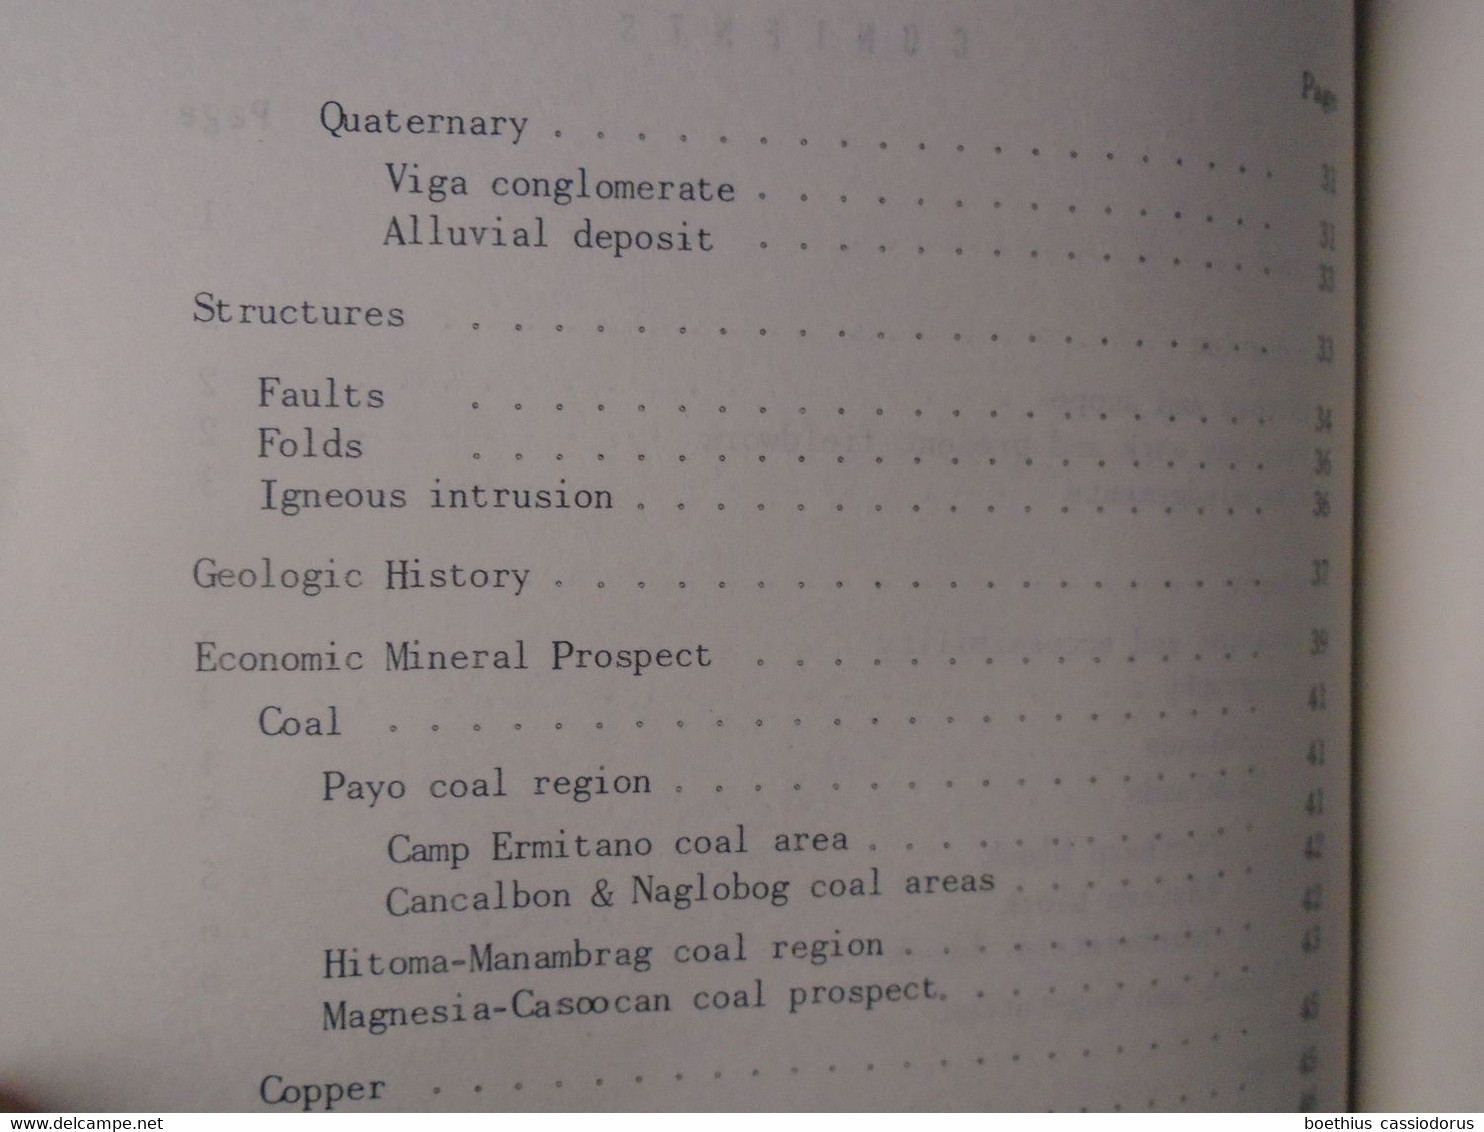 THE GEOLOGY AND MINERAL RESOURCES OF CATANDUANES PROVINCE BY FEDERICO E. MIRANDA & BASSANIO S. VARGAS 1967 PHILIPPINES - Geowissenschaften